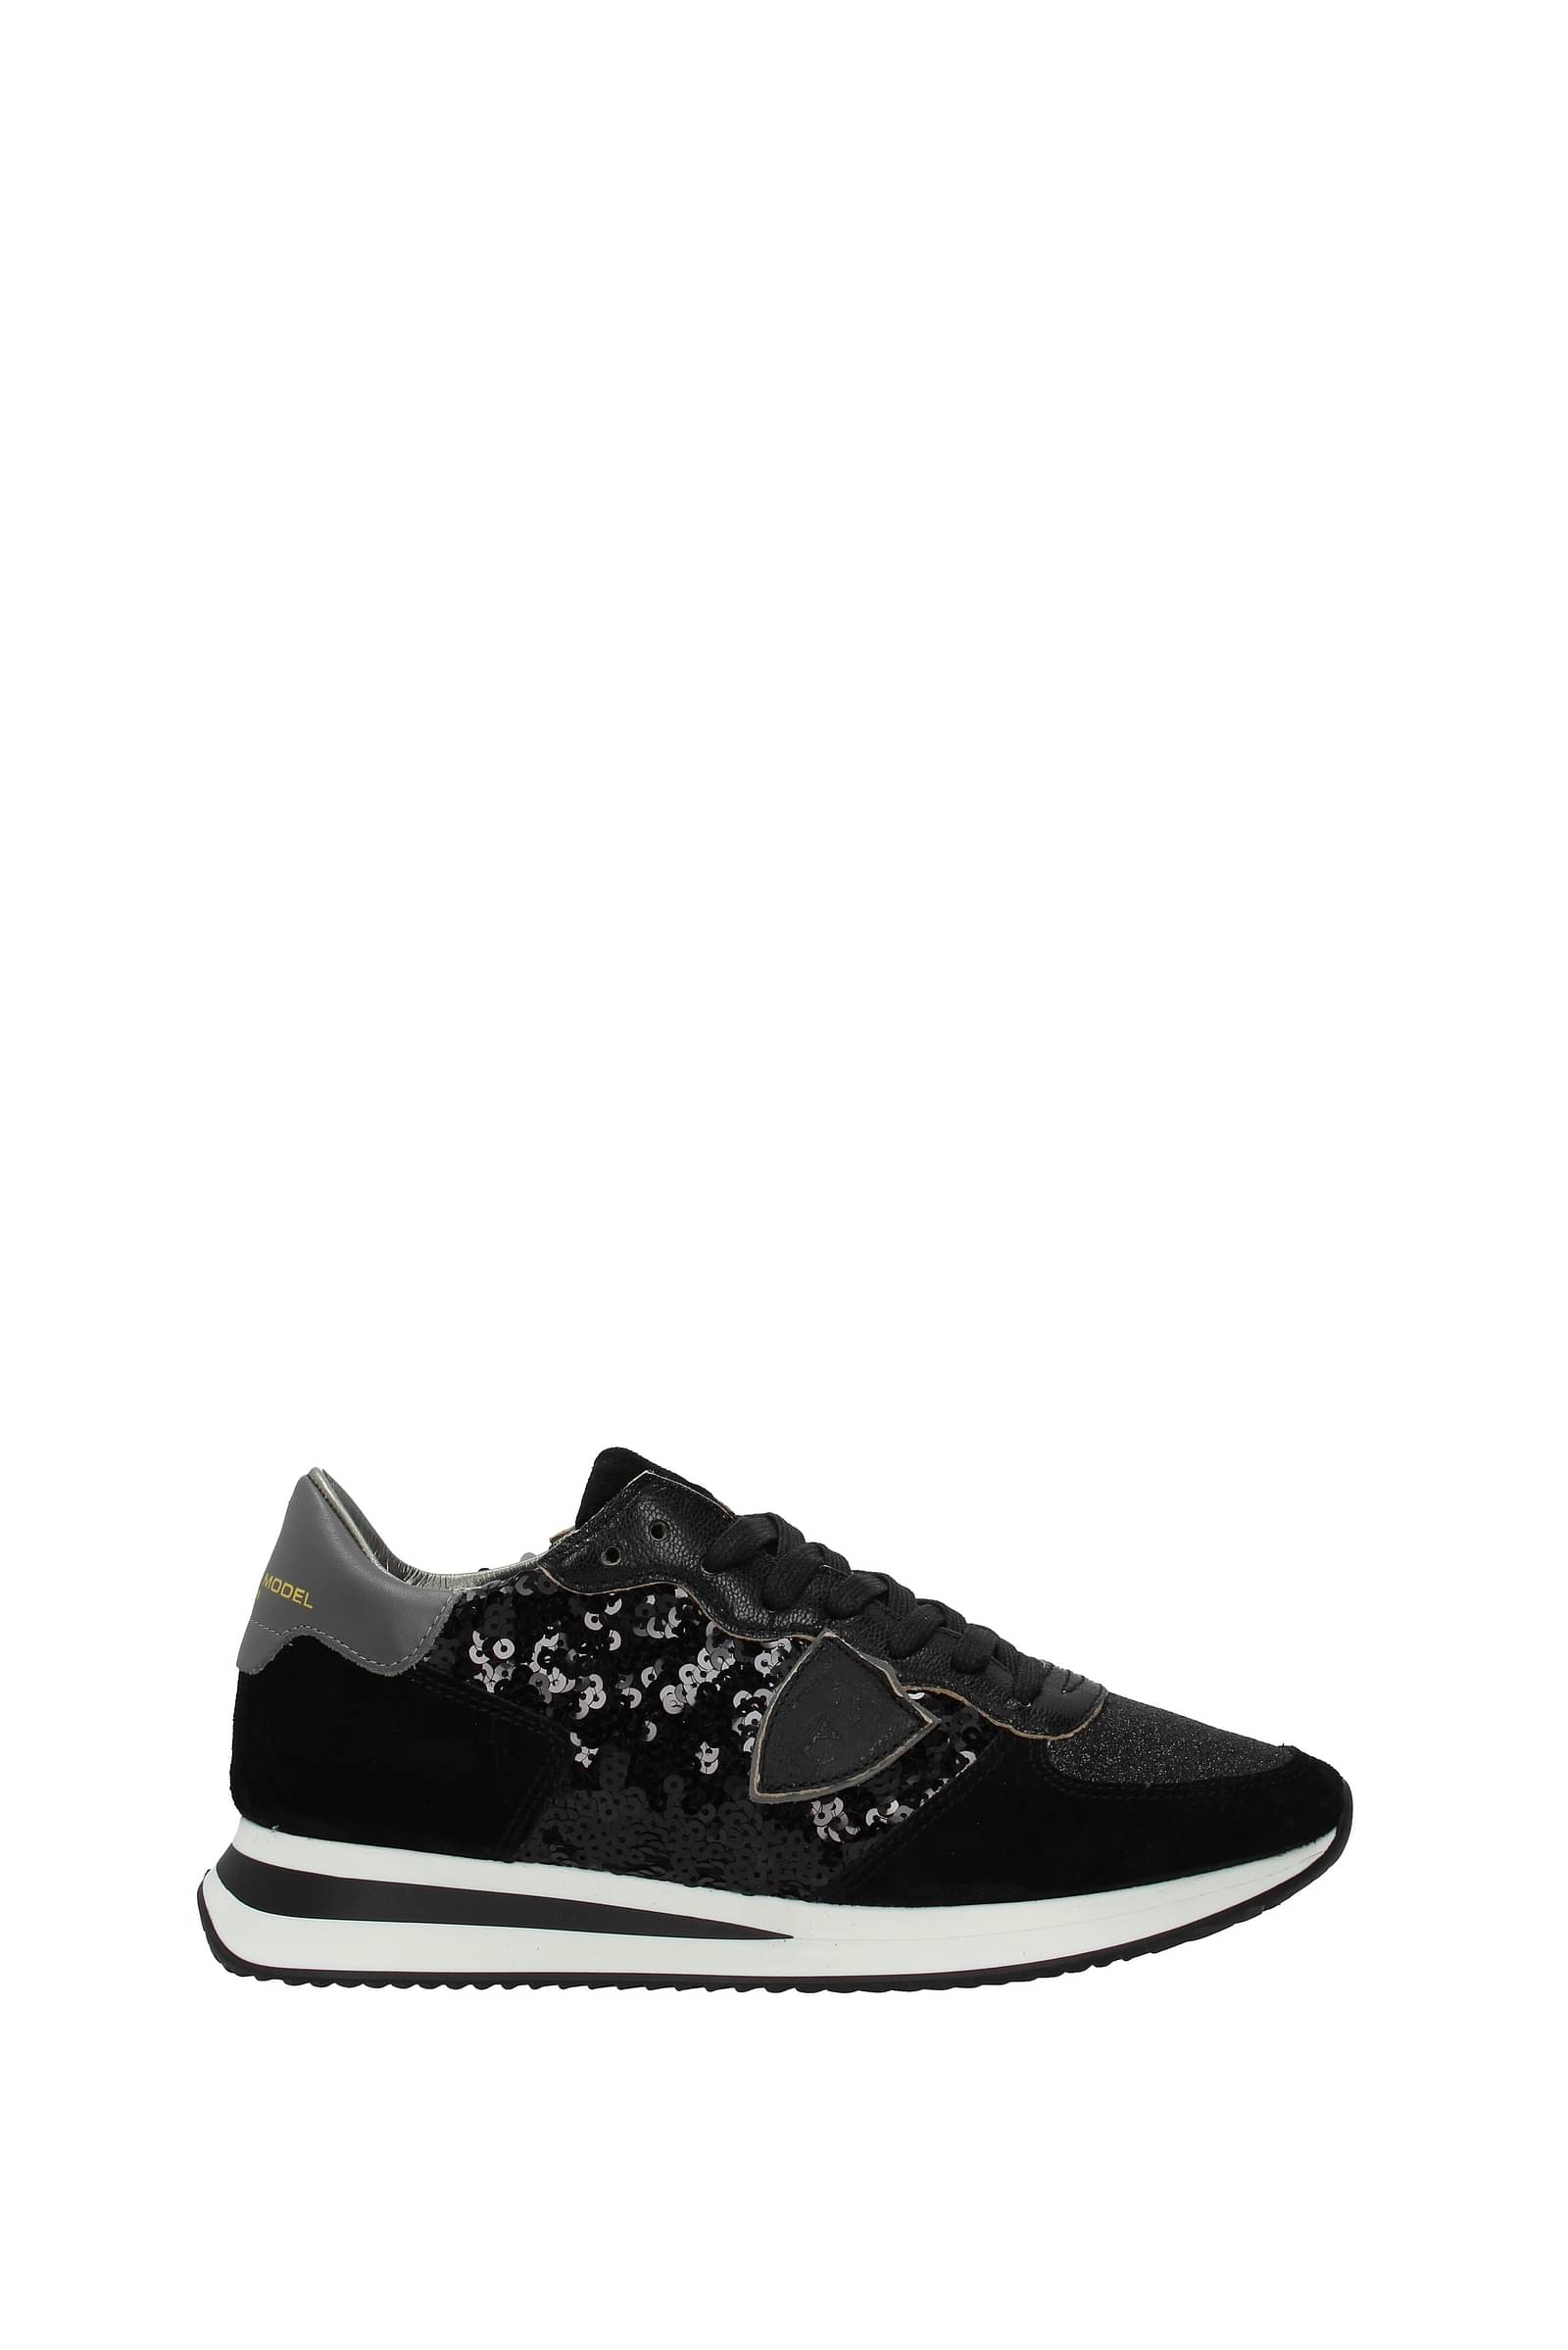 B-Exit Donna Scarpe Sneakers Sneakers con glitter Sneakers Donna Paillettes 